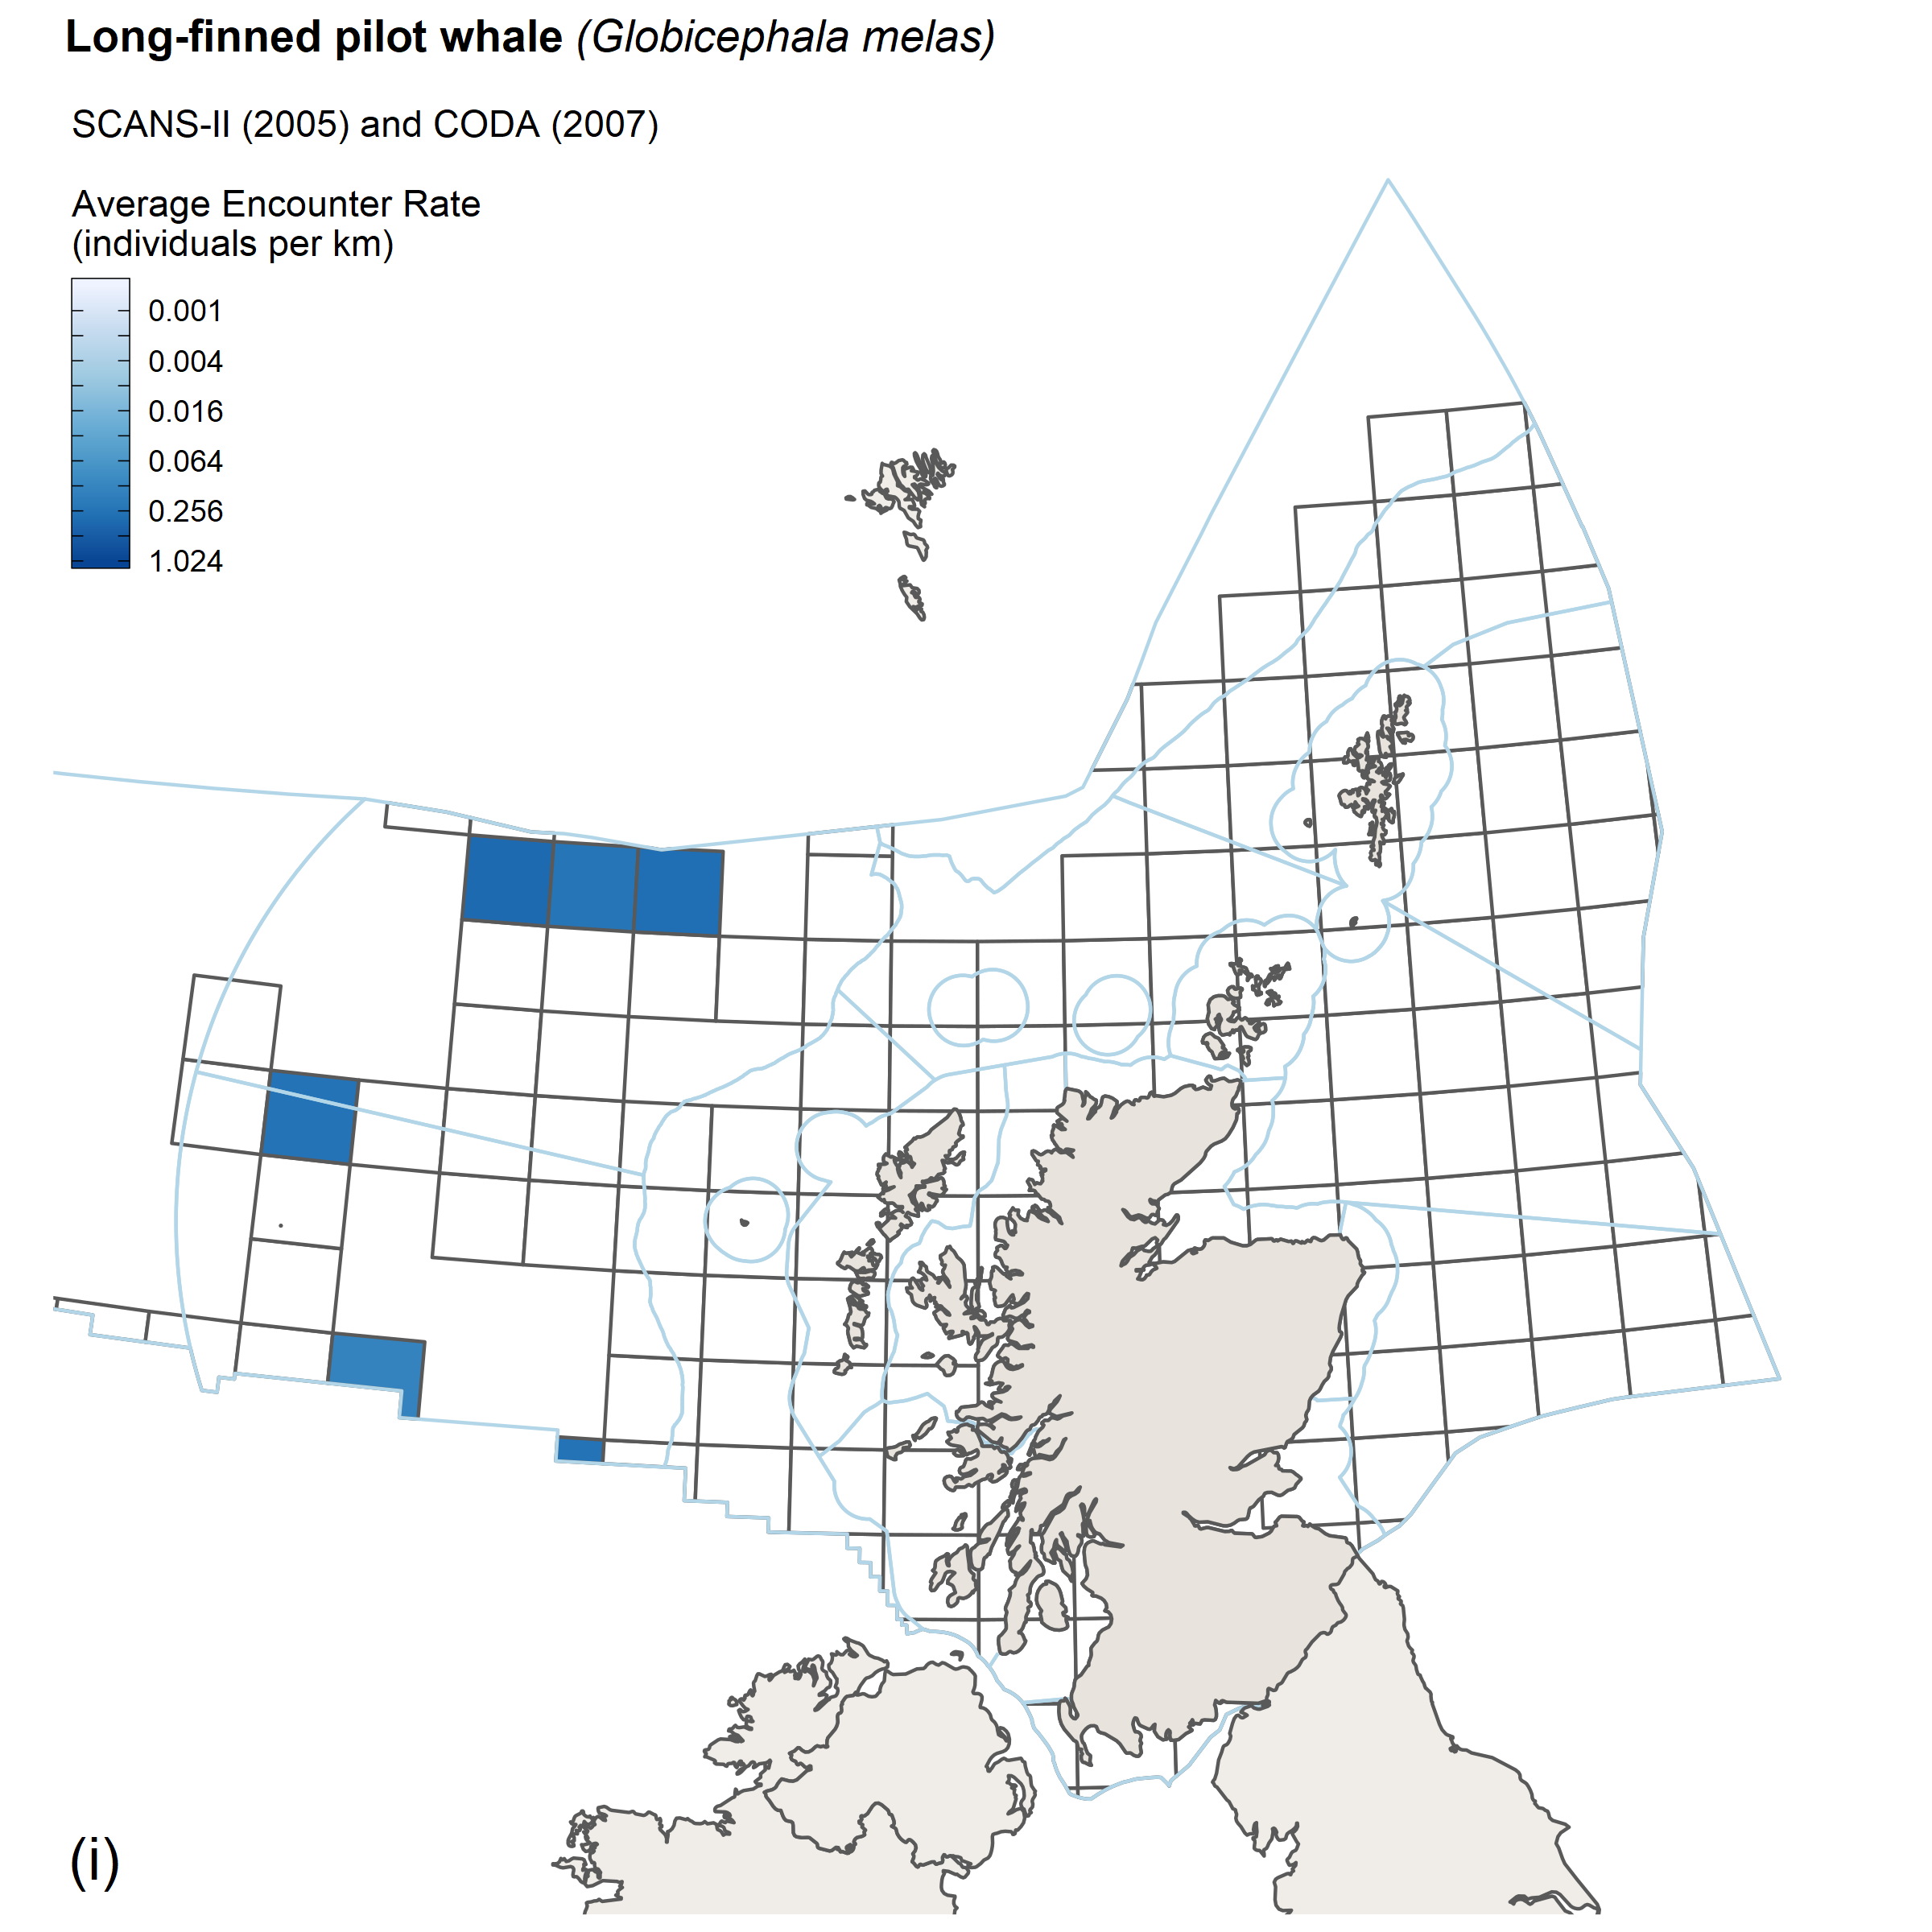 Encounter rates for long finned pilot whale from SCANS II/CODA survey